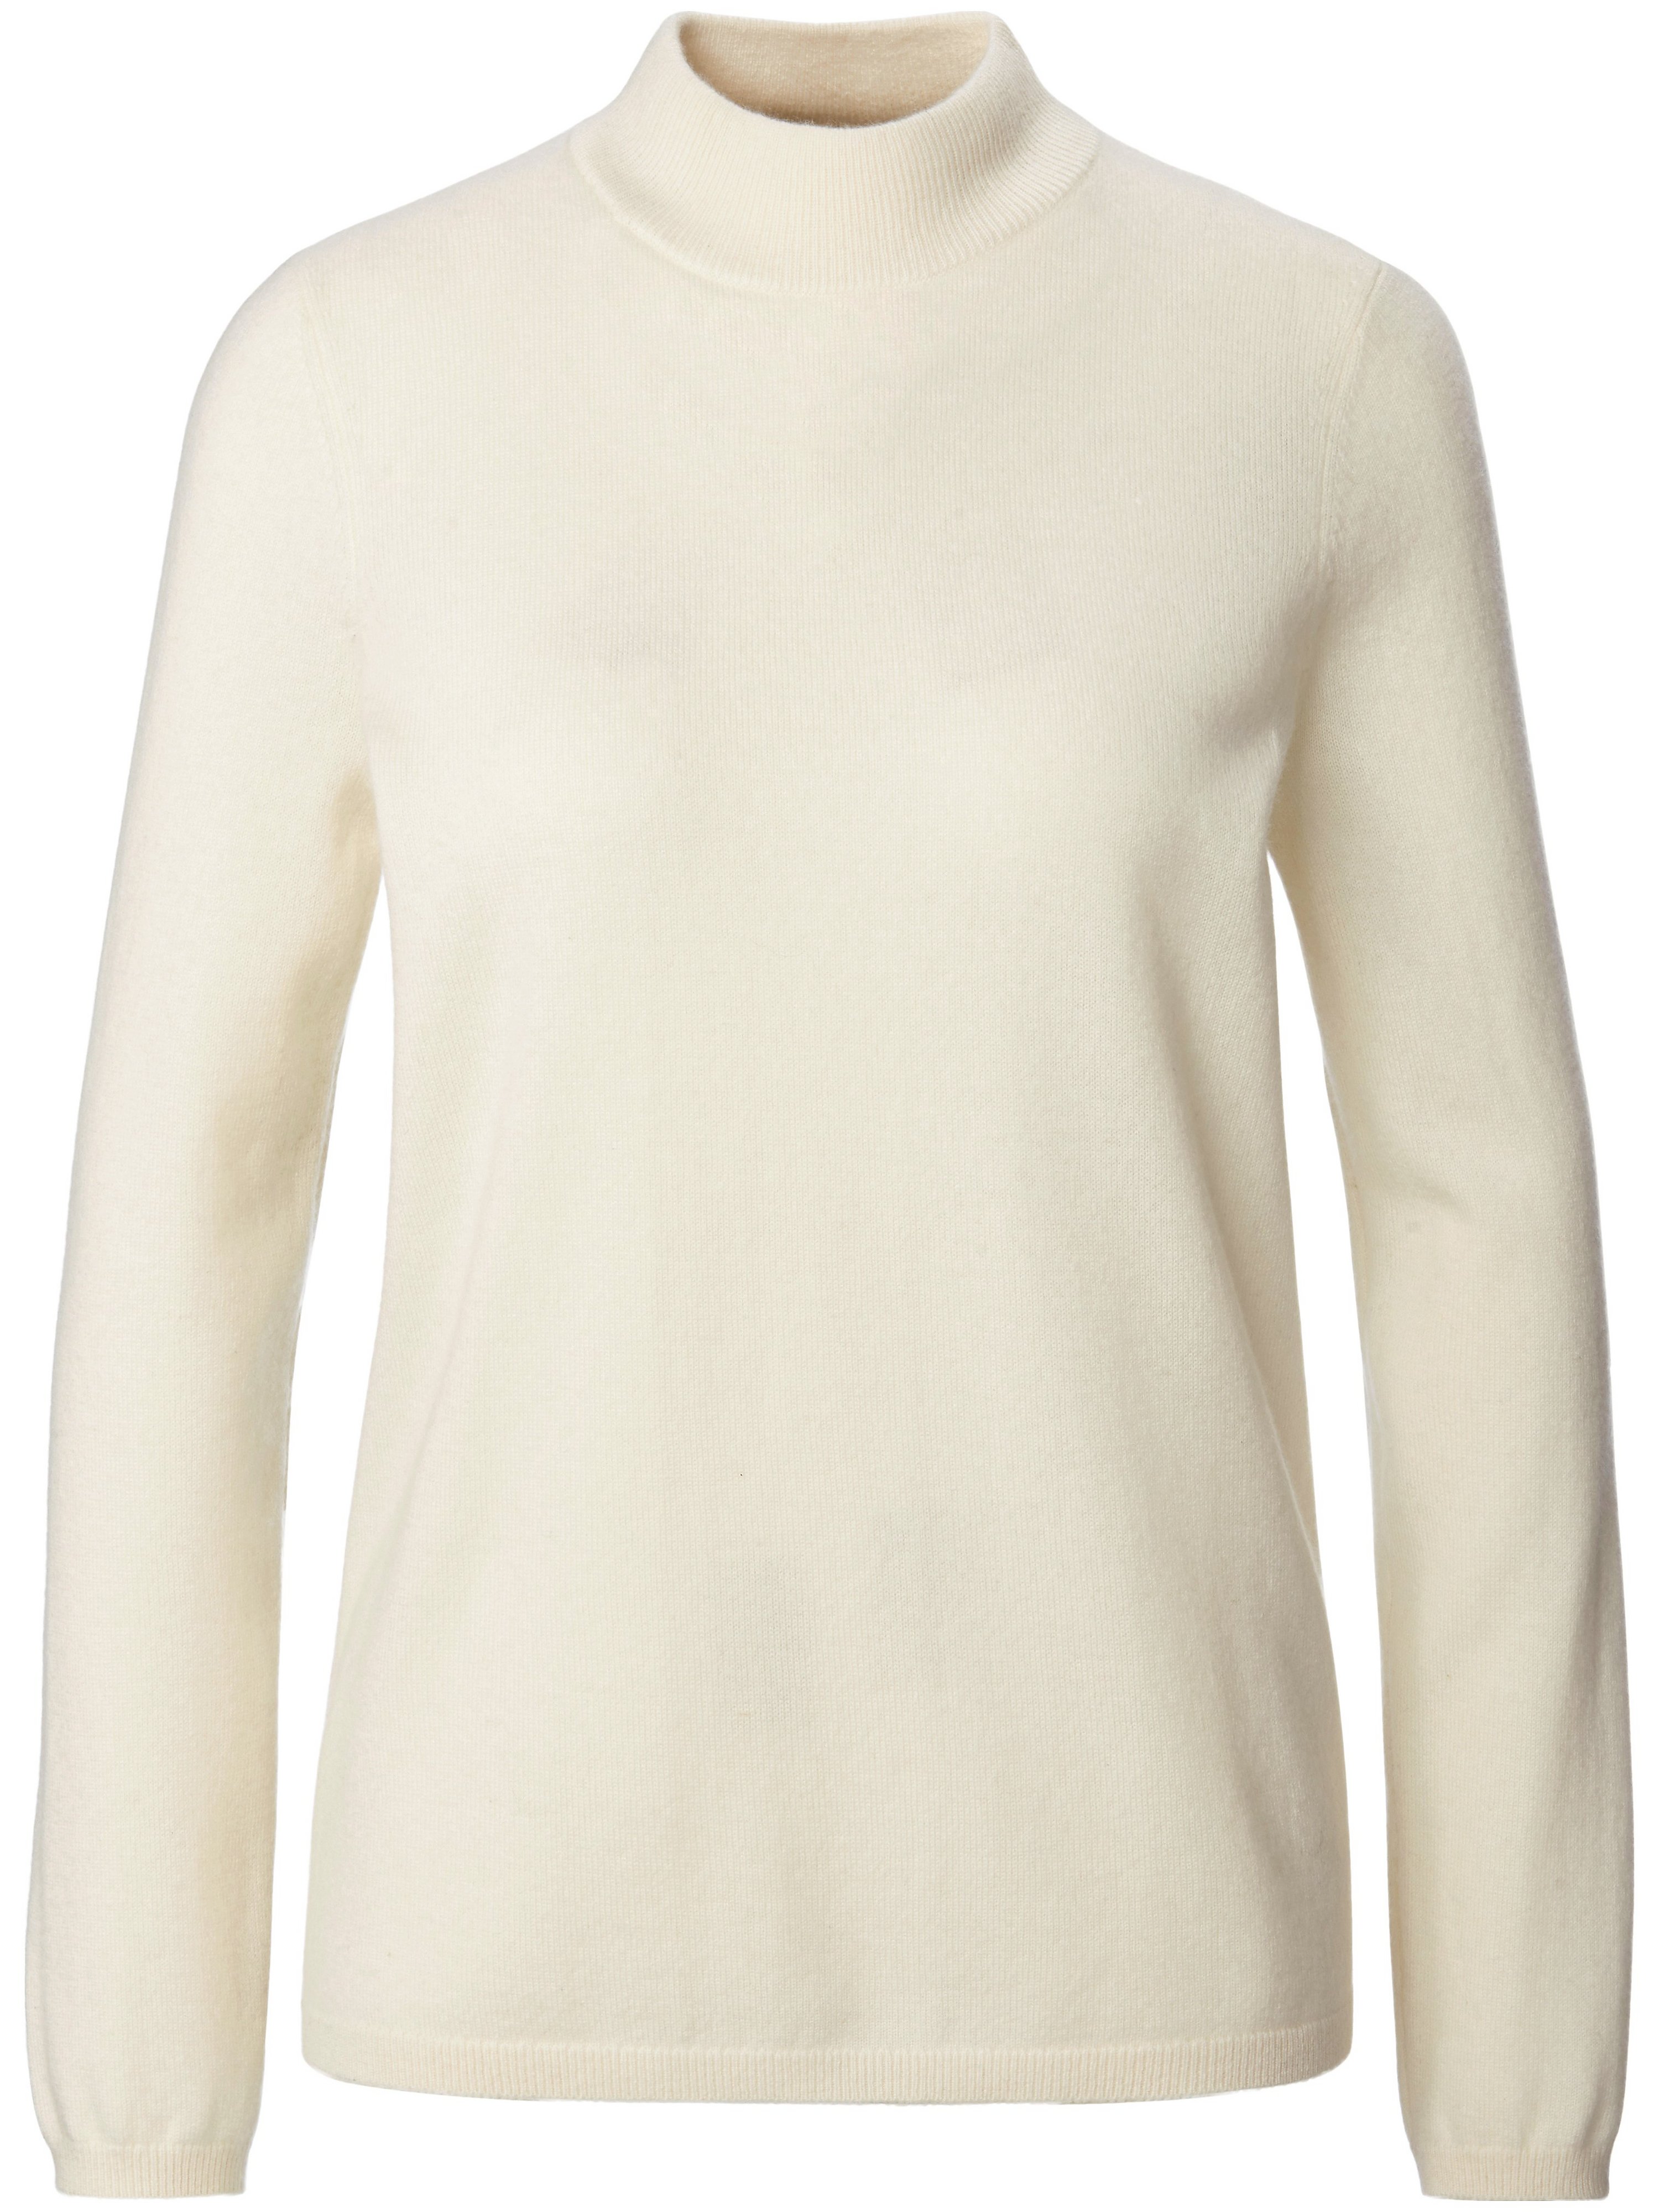 Le pull 100% cachemire  include blanc taille 42